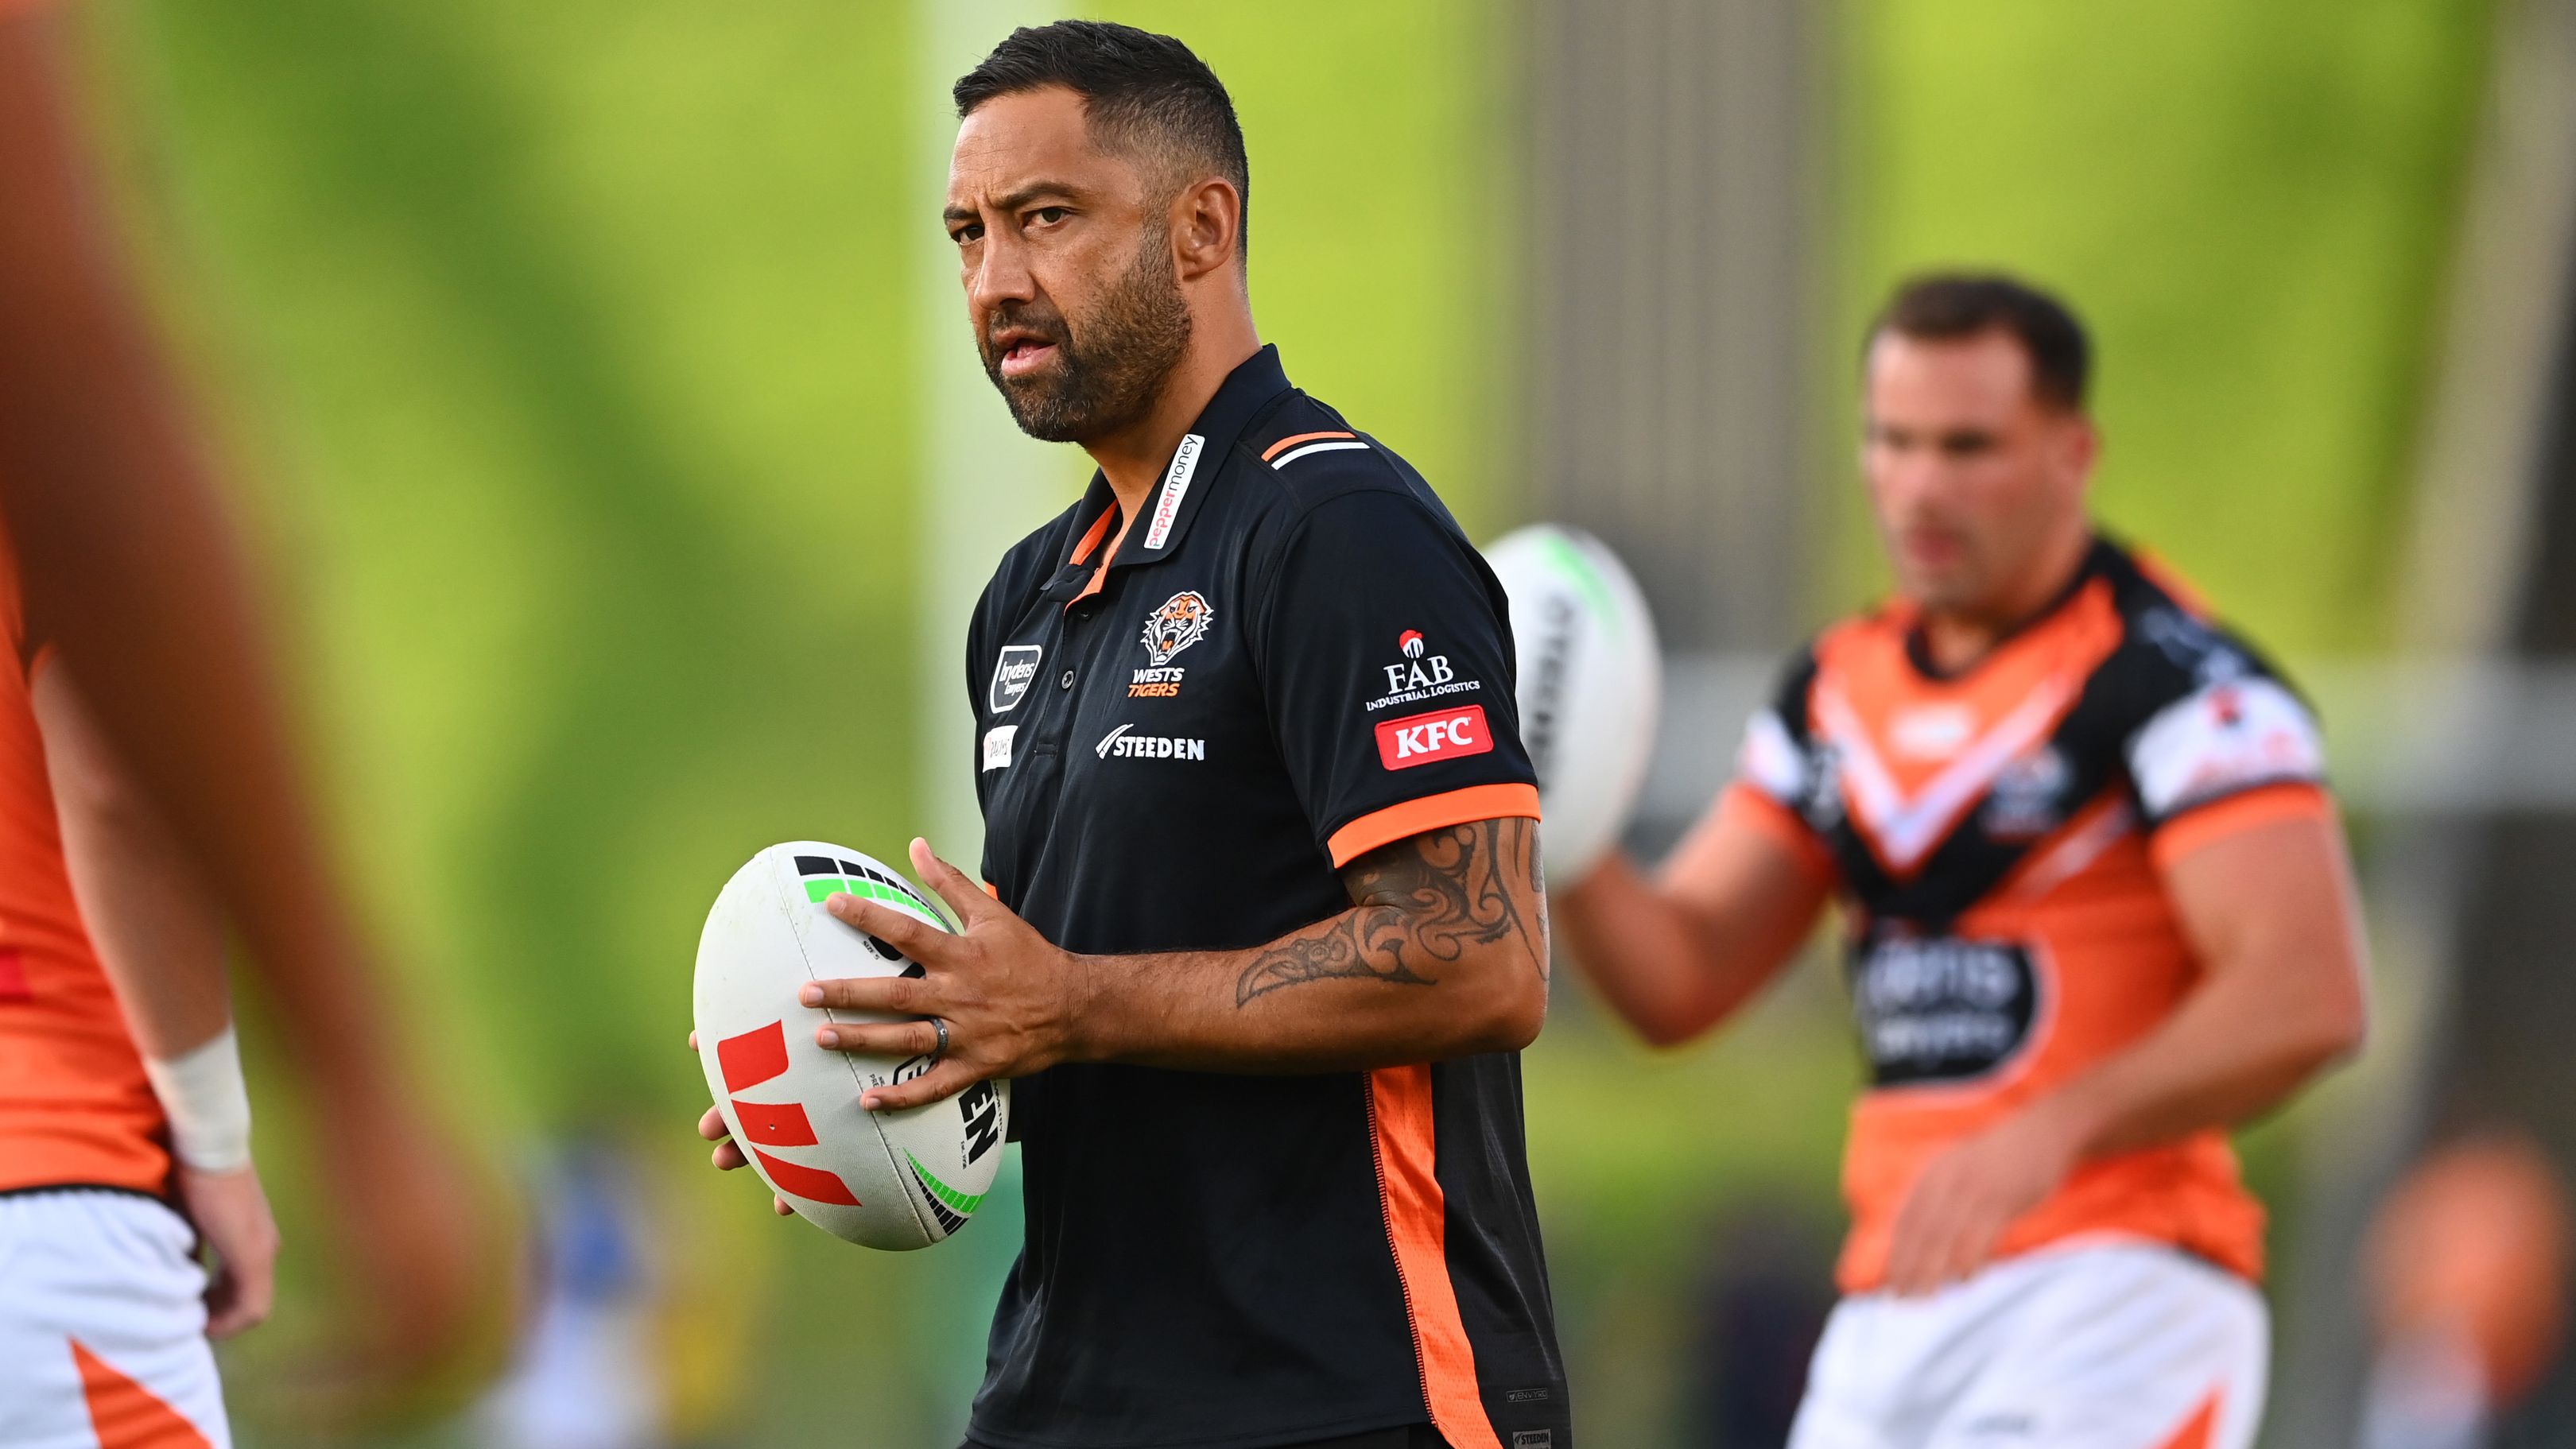 West Tigers assistant coach Benji Marshall. (Photo by Hannah Peters/Getty Images)